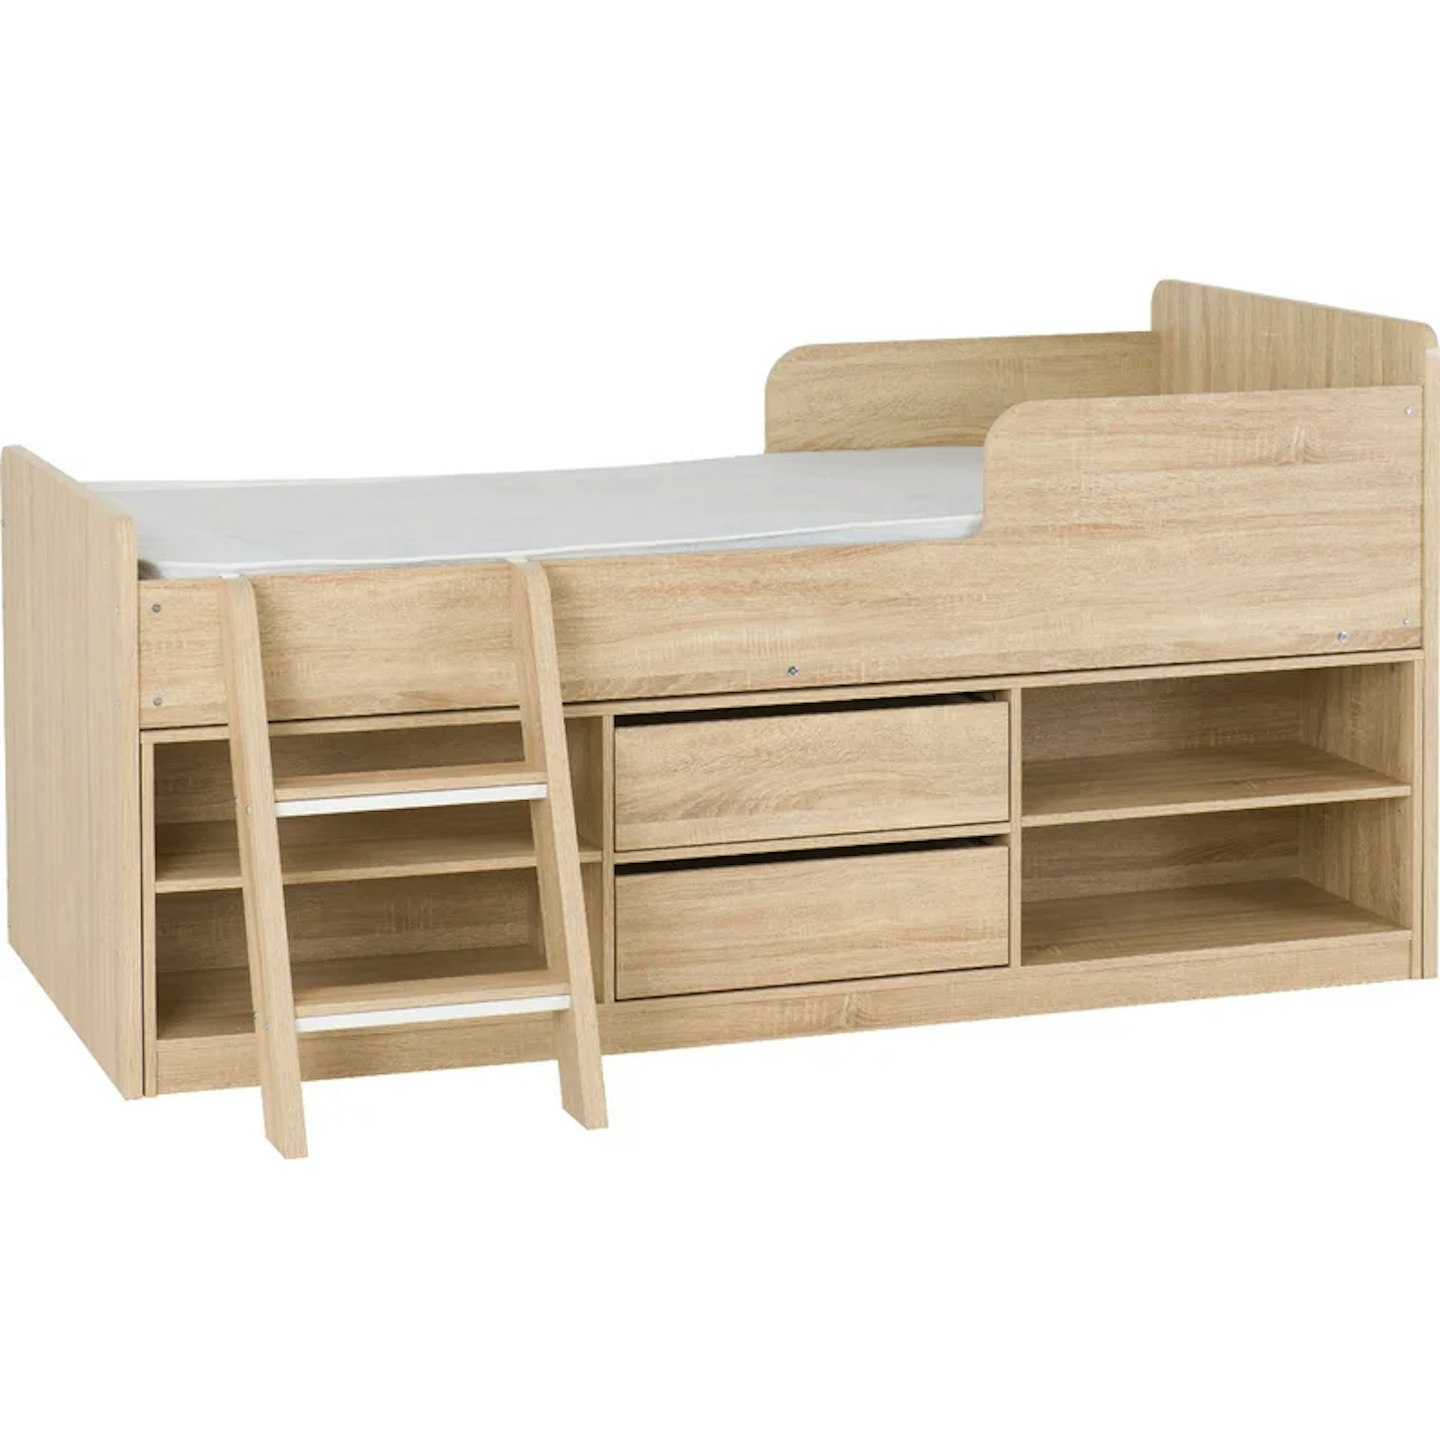 Isabelle & Max Byron Single (3') Loft Bed with Shelves by Isabelle & Max